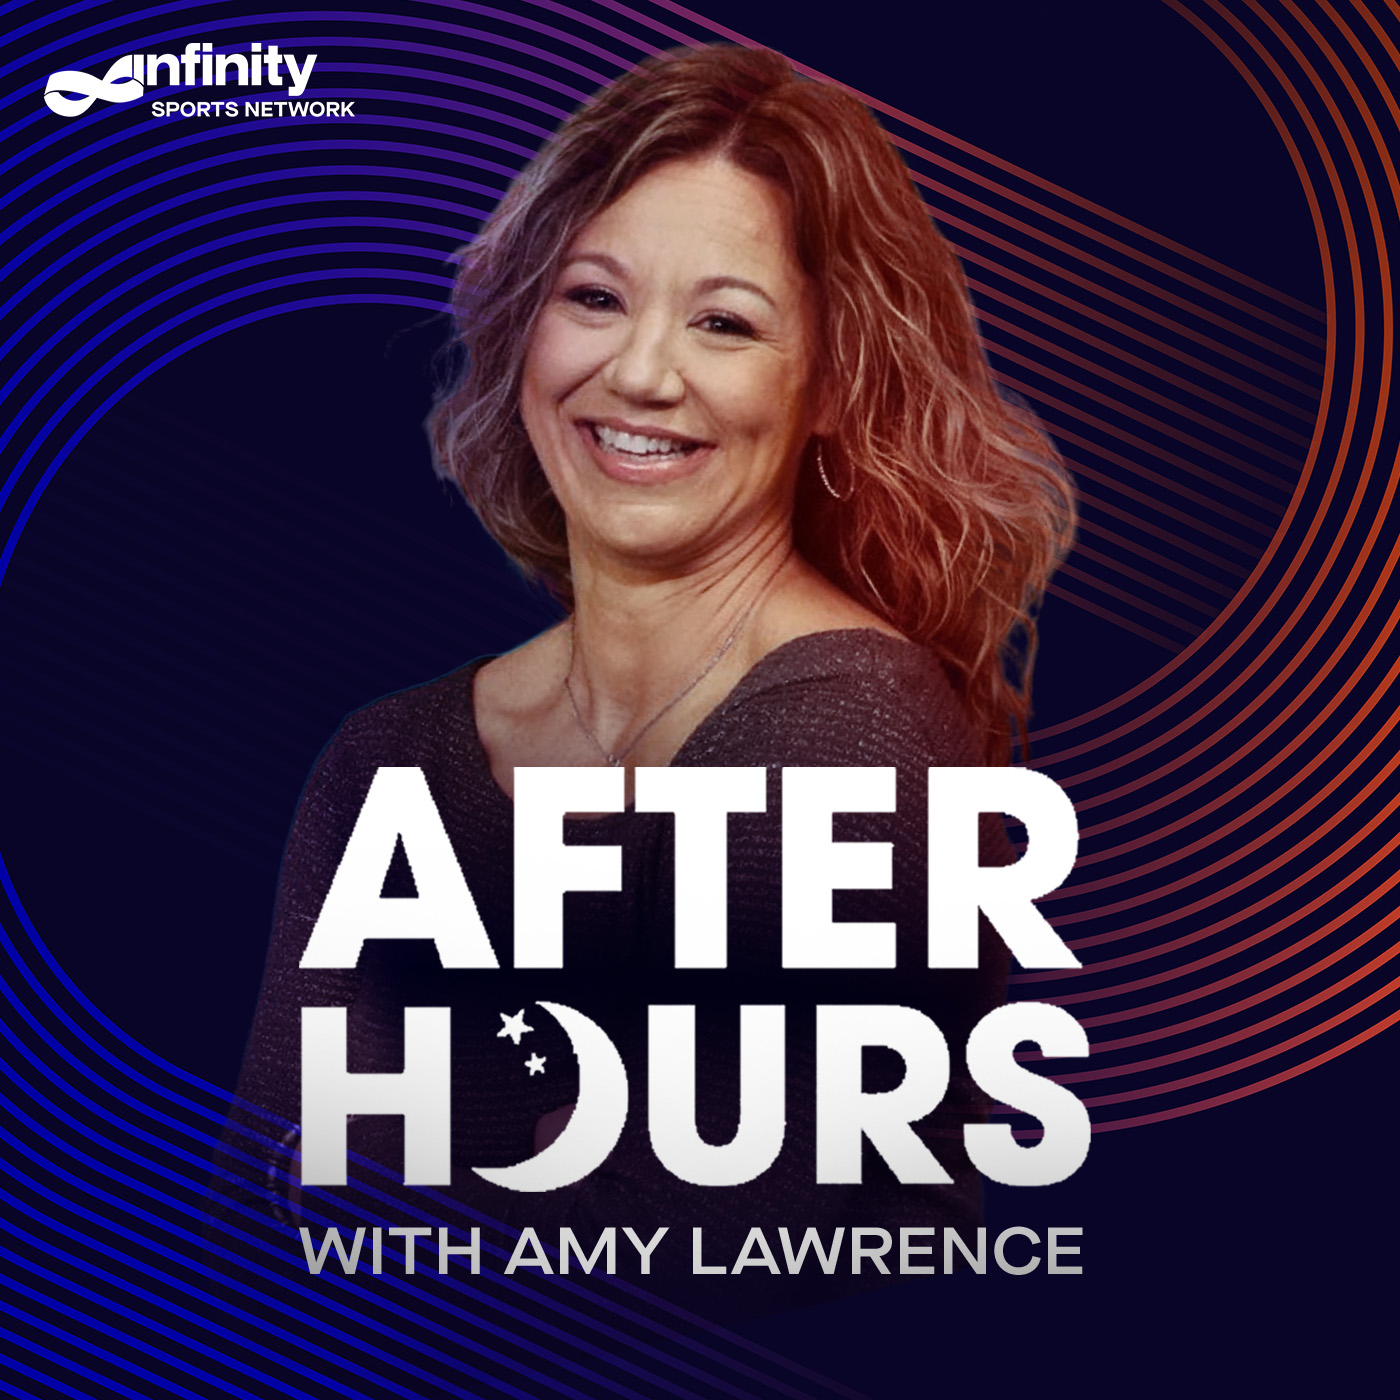 8-23-21 After Hours with Amy Lawrence PODCAST: Hour 1